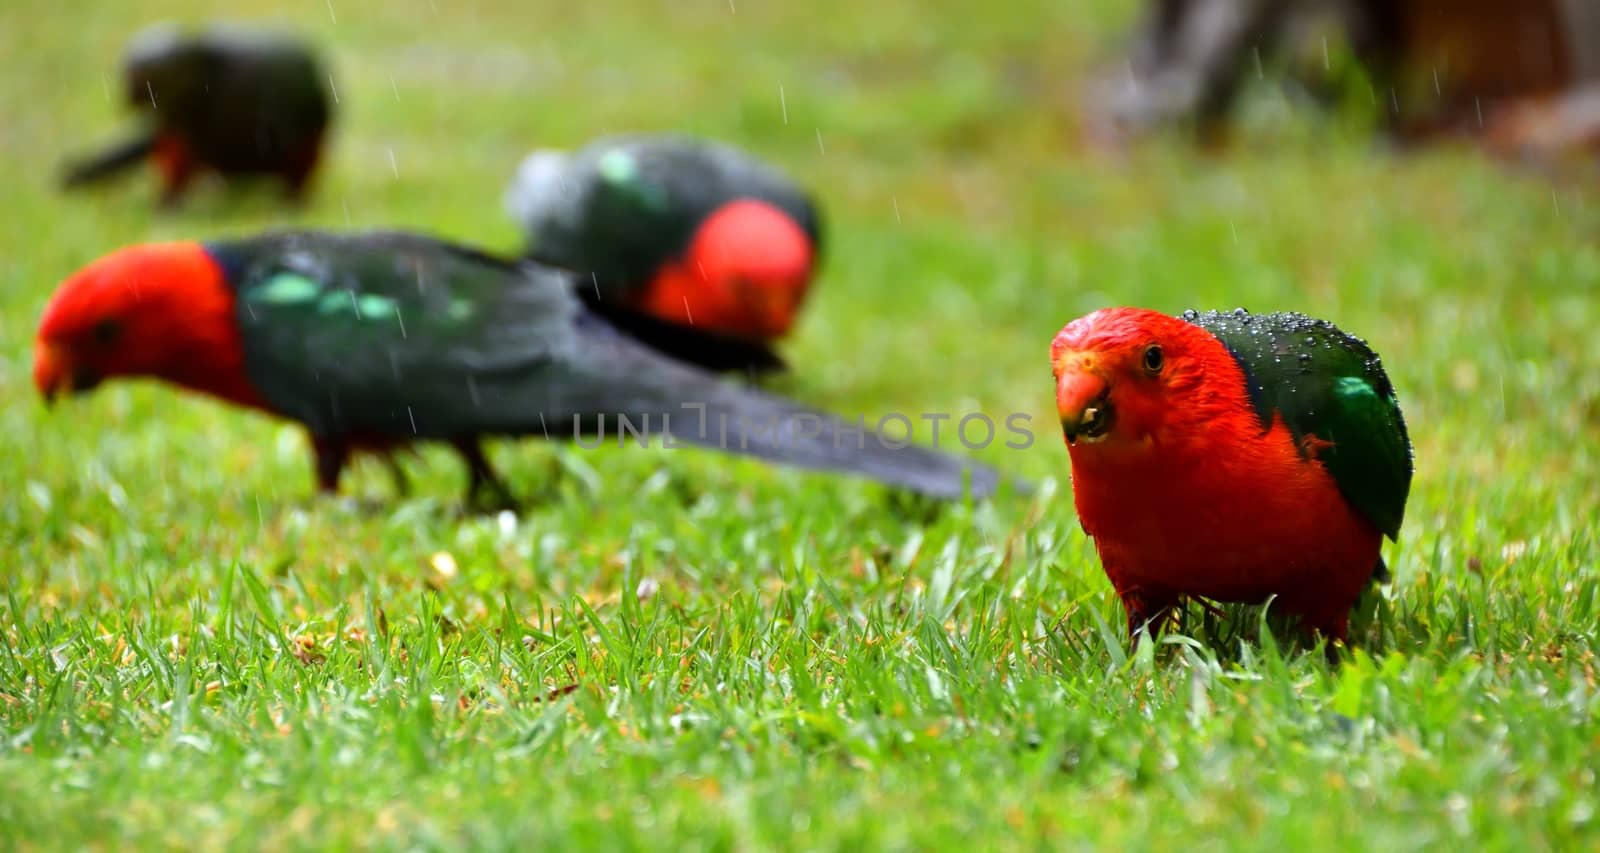 Female and male King Parrots in the rain on grass